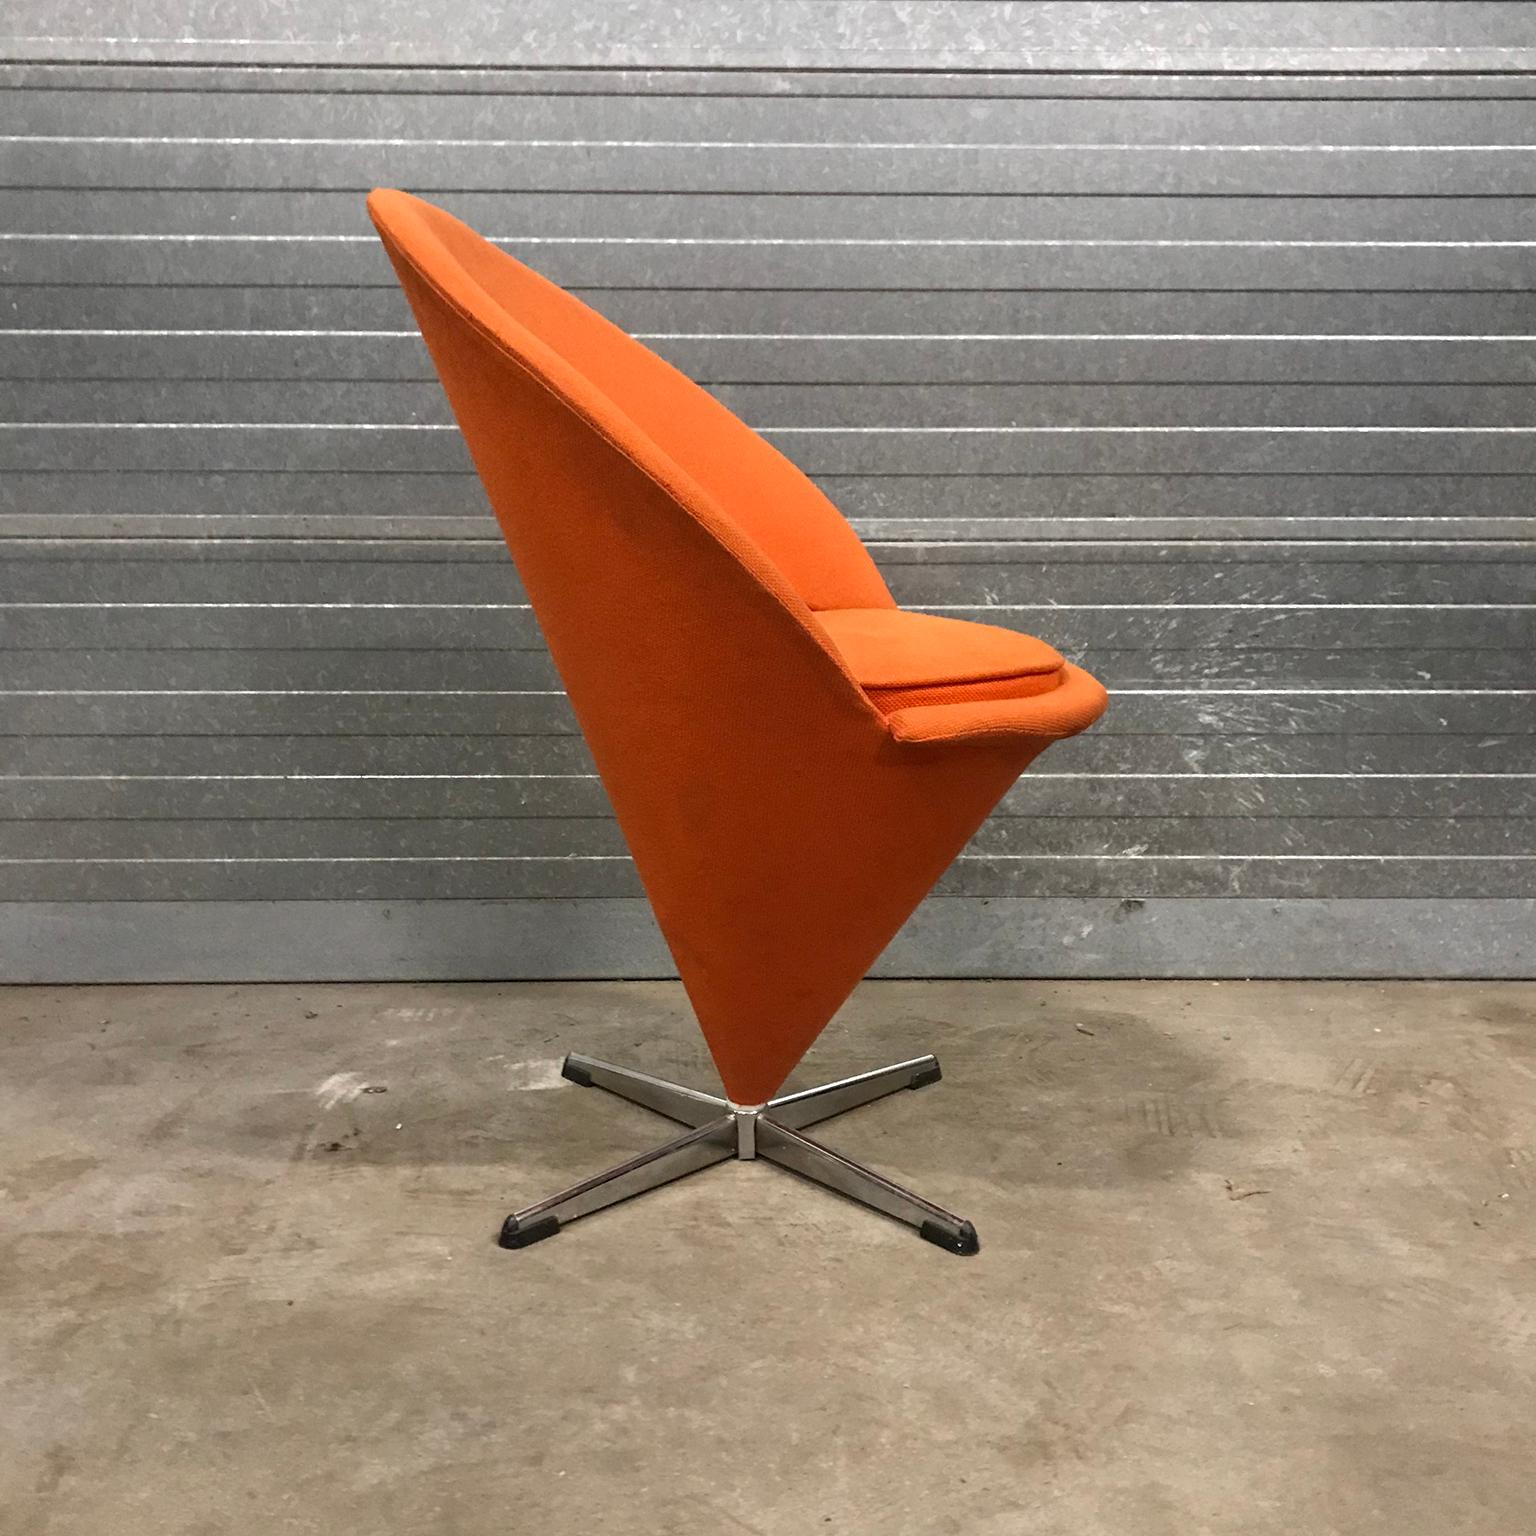 Beautiful orange cone chair. This Cone chair has a vibrant orange upholstery and has a cord stitched in some off the edges (pictures #1, #6 - #10). The chair shows some traces of wear like some damage of the fabric (#10- #12), some light white